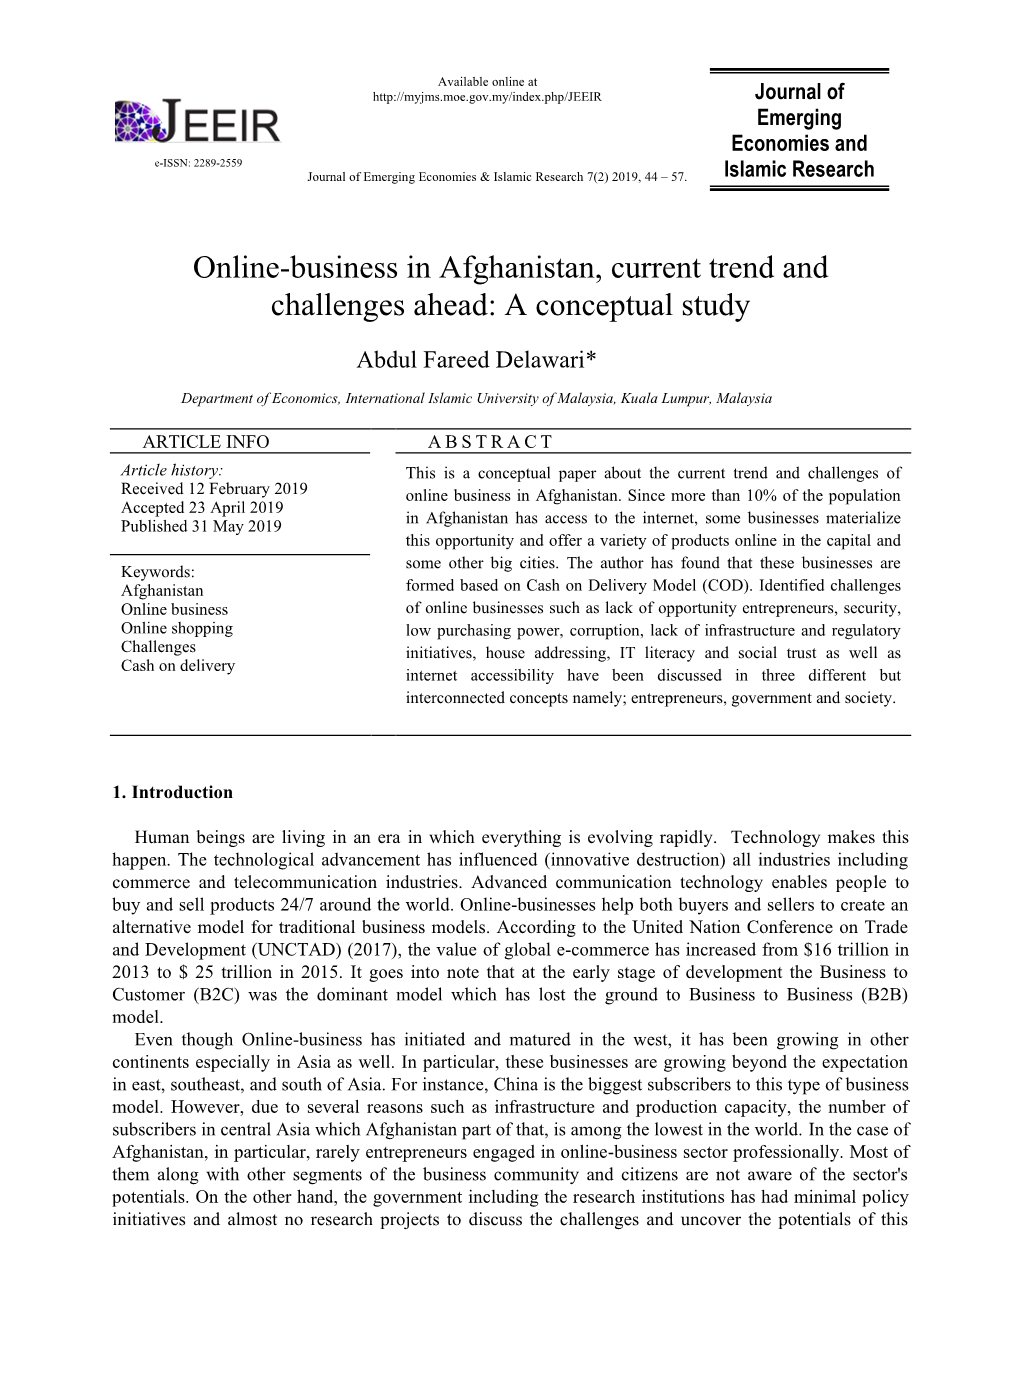 Online-Business in Afghanistan, Current Trend and Challenges Ahead: a Conceptual Study